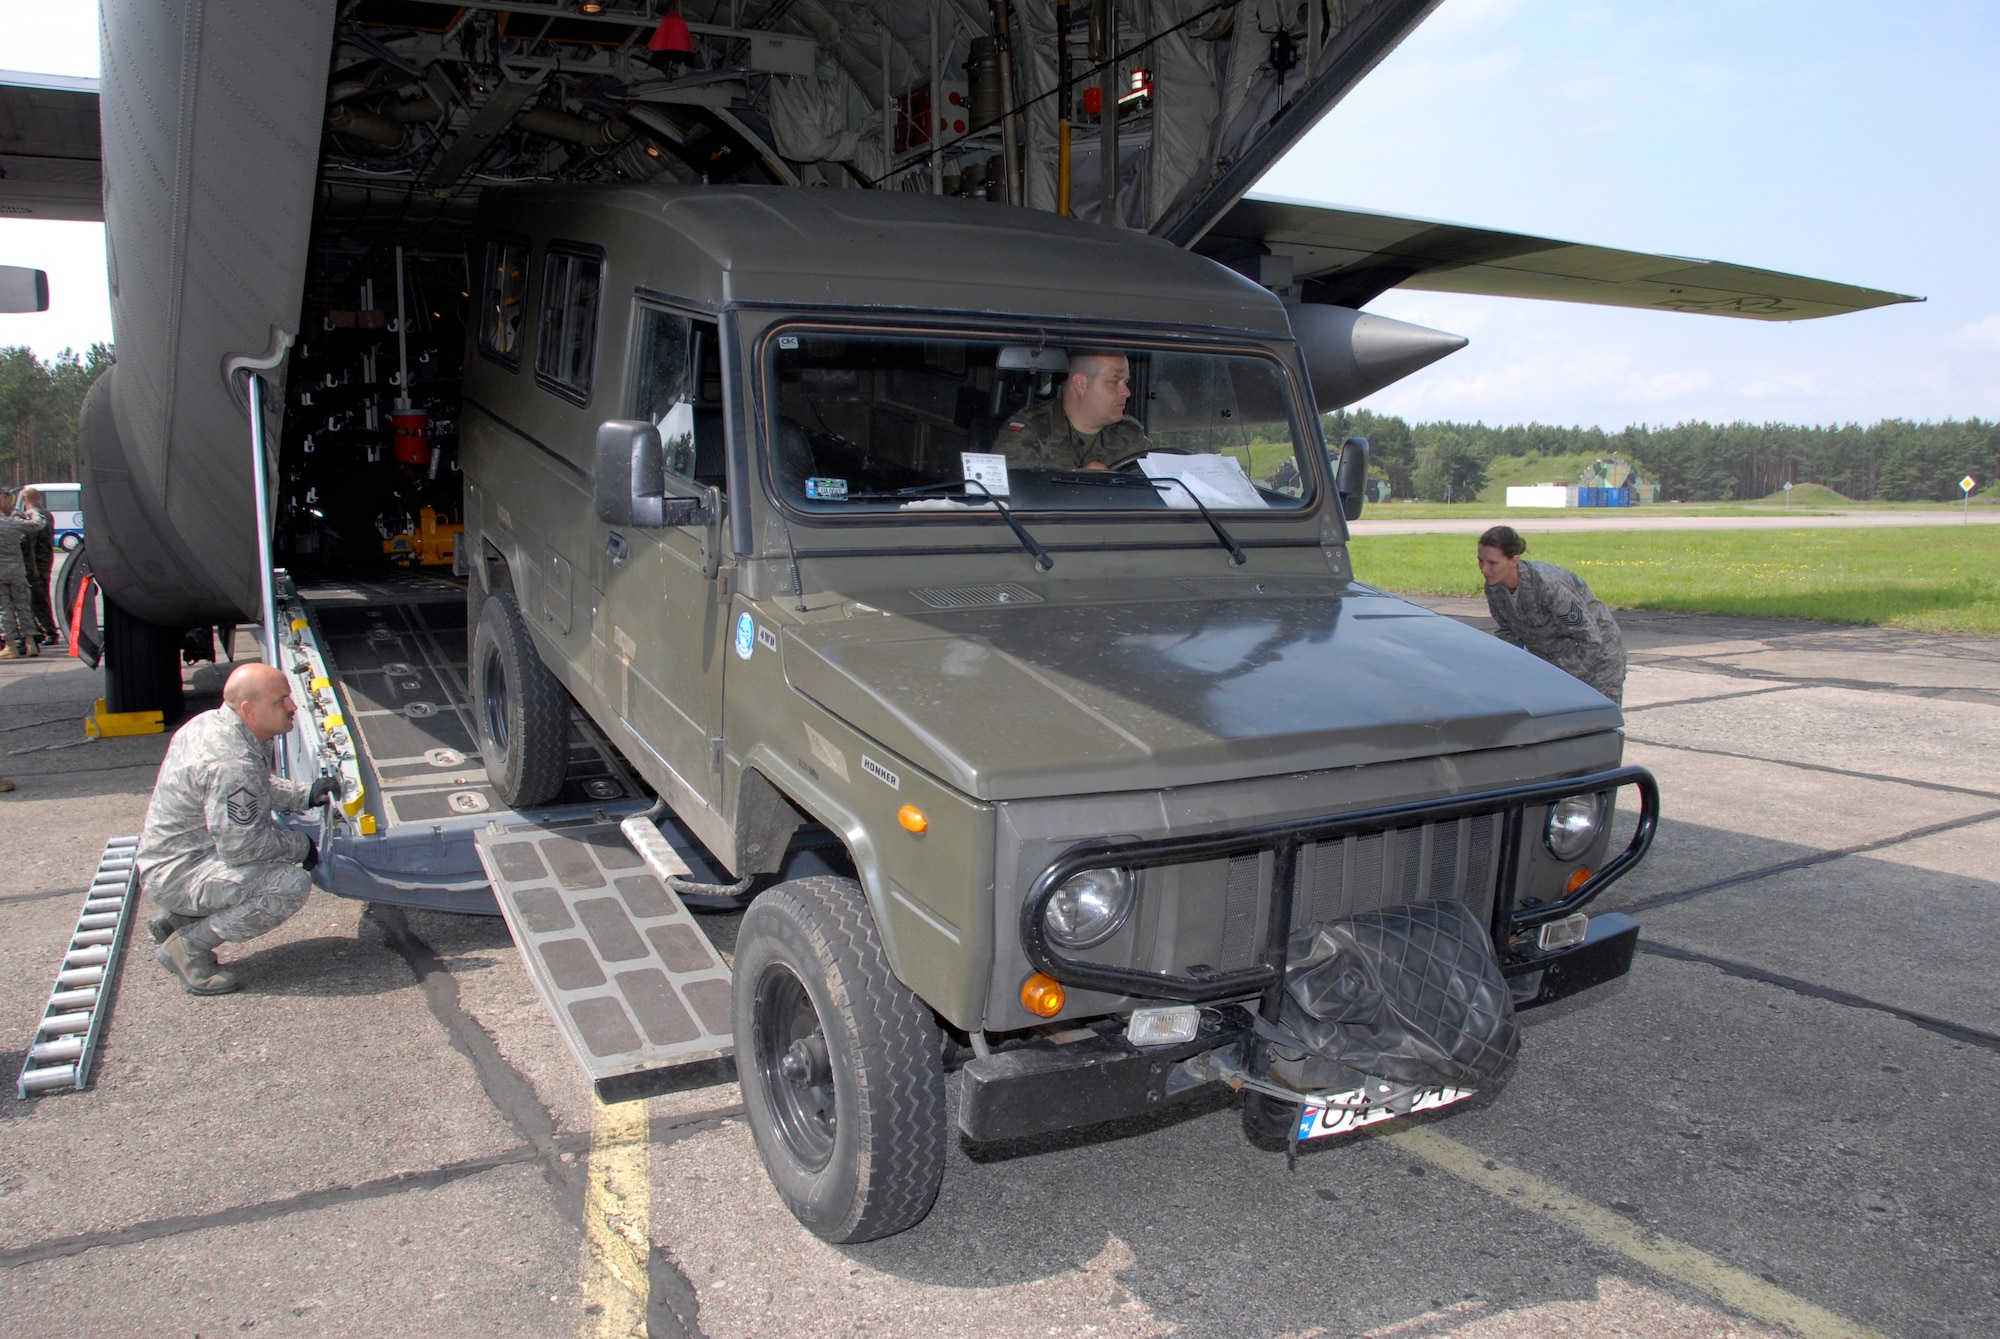 Chief Master Sgt. Rick Barnick, 169th Airlift Squadron Chief Loadmaster,
discusses options he uses when wenching vehicles as he and his Polish
counterparts as they prepare to wench a Polish 'Honker' all terrain vehicle
on to a 182nd Airlift Wing C-130. The 182nd Airlift Wing is in Poland as
part of the Illinois Air National Guards Partnership with the Polish Air
Force under the State Partnership Program. (U.S. Air Force photo/Tech. Sgt. Shane Hill)